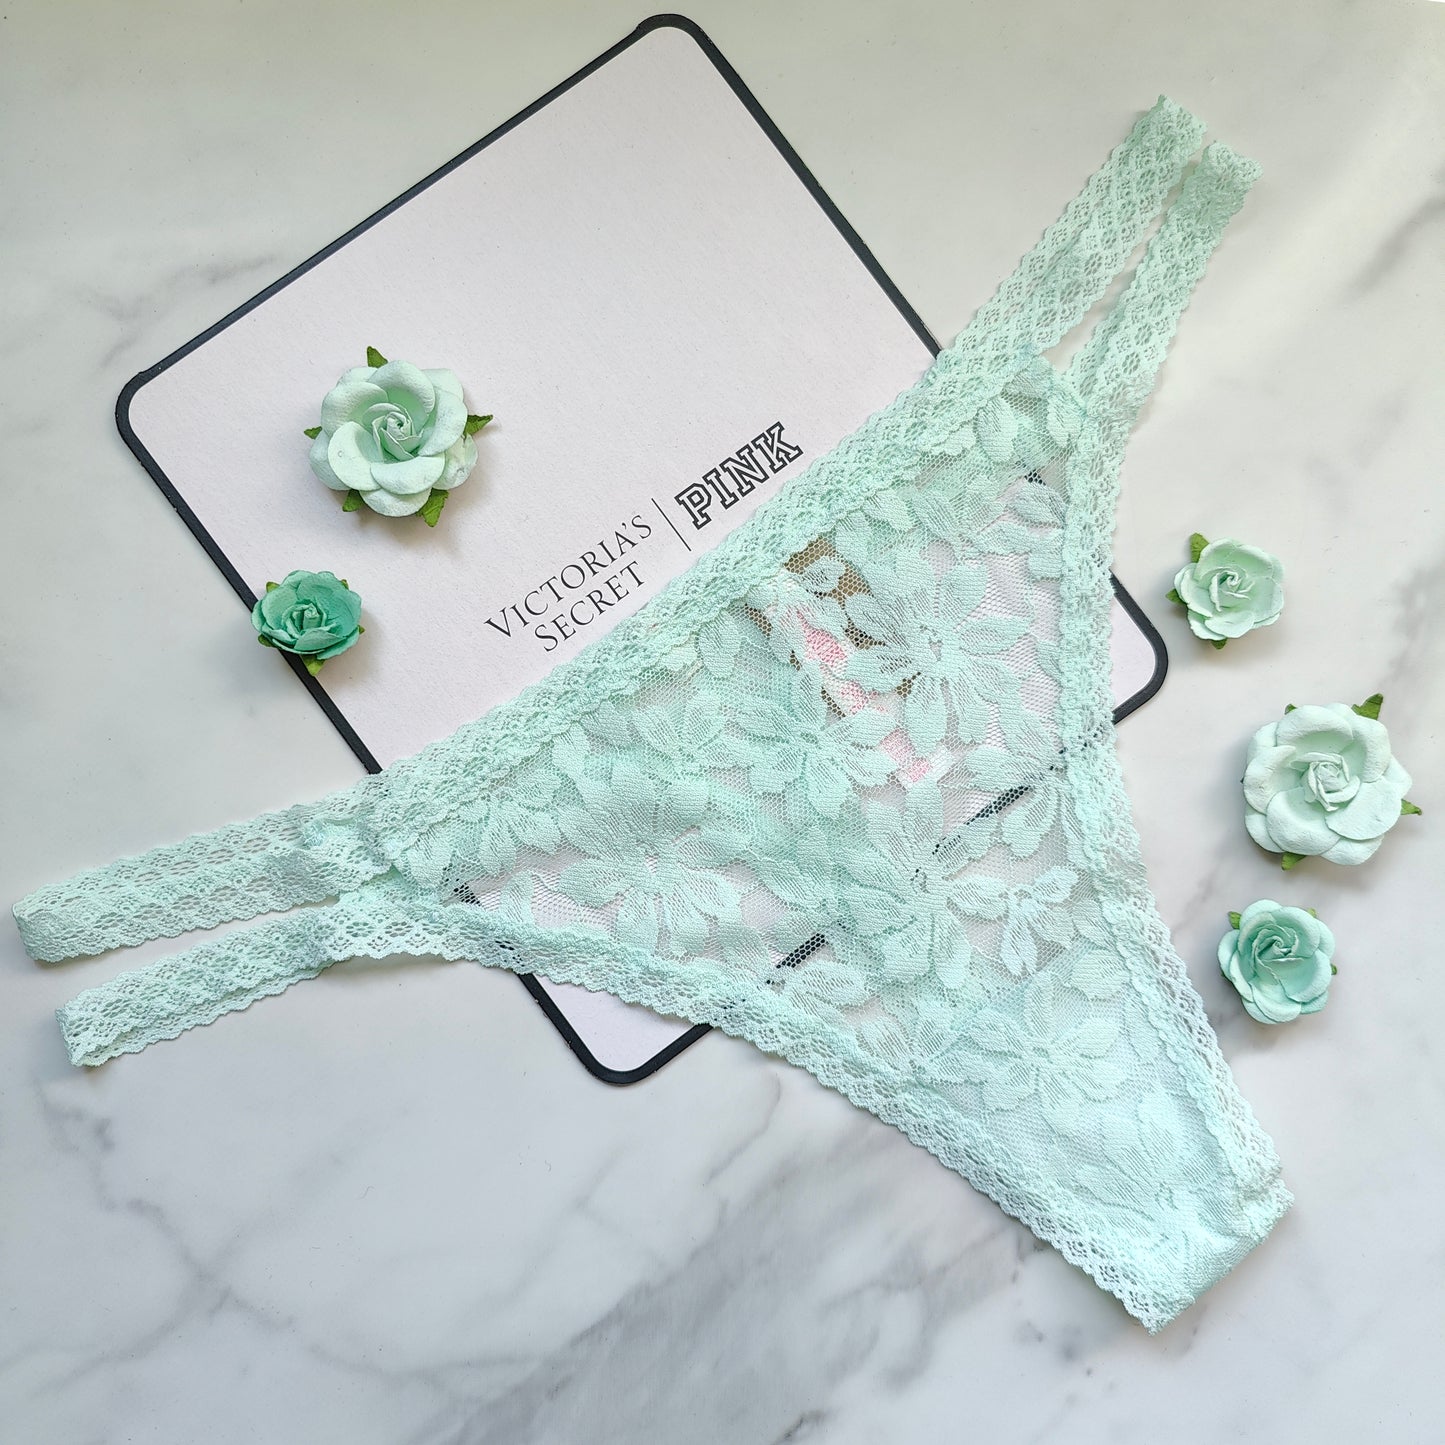 Victoria's Secret PINK Bright Green Lace Strappy Side Thong Panty